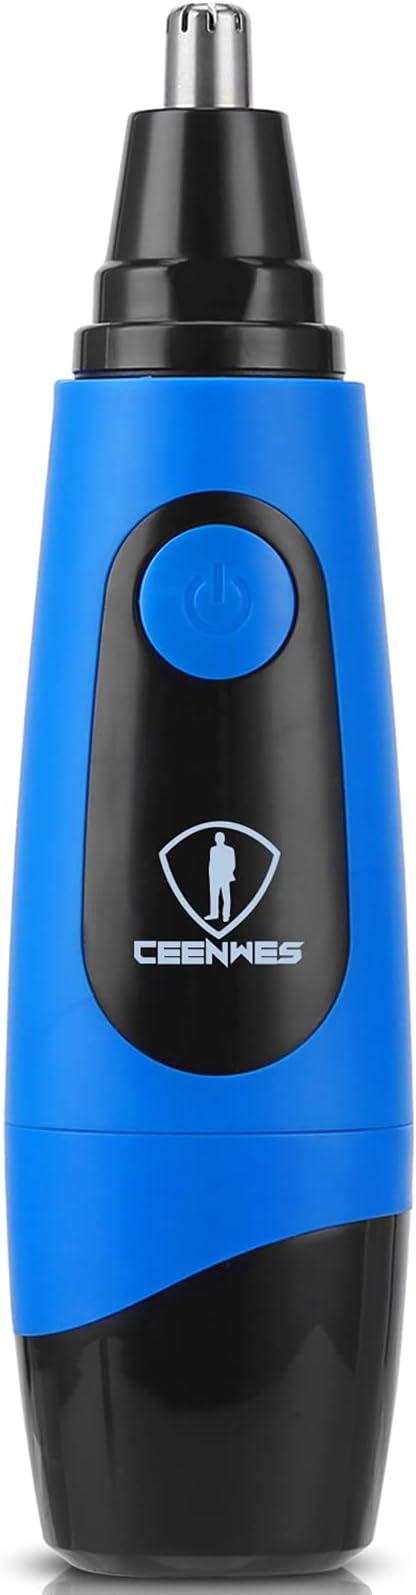 ceenwes nose hair trimmer professional mute painless  ceenwes ?b07shc7jtd